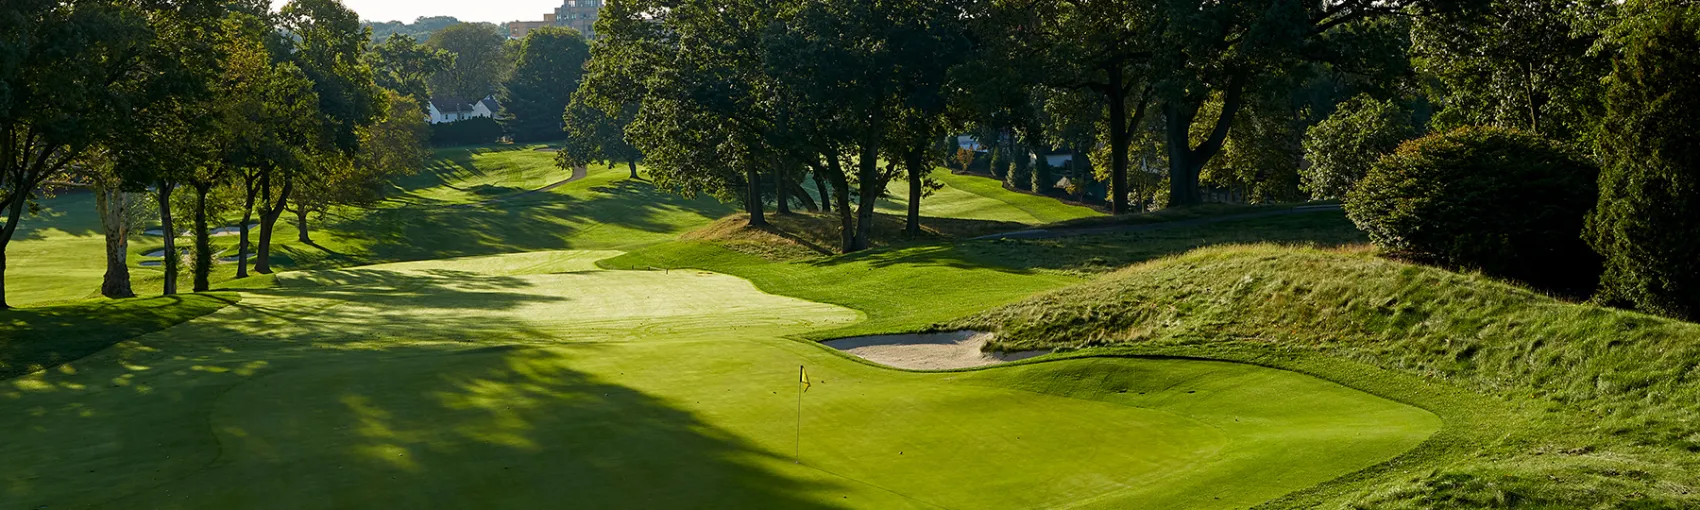 PREVIEW: 123rd Amateur Championship at Forest Hill FC